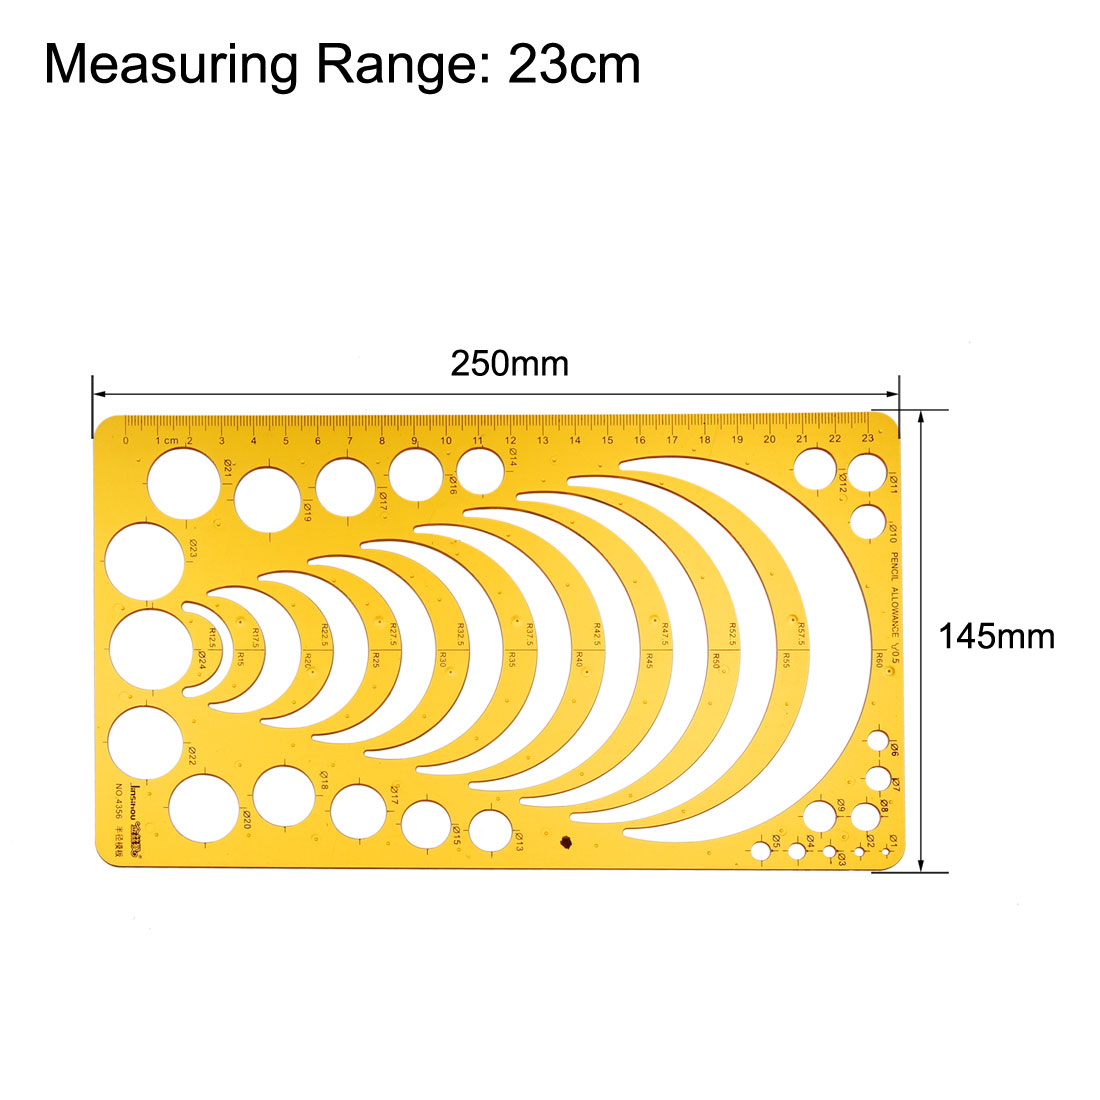 uxcell 2pcs Geometric Drawing Template Measuring Ruler Plastic 23cm 18cm for Drawing Art Design and Building Formwork